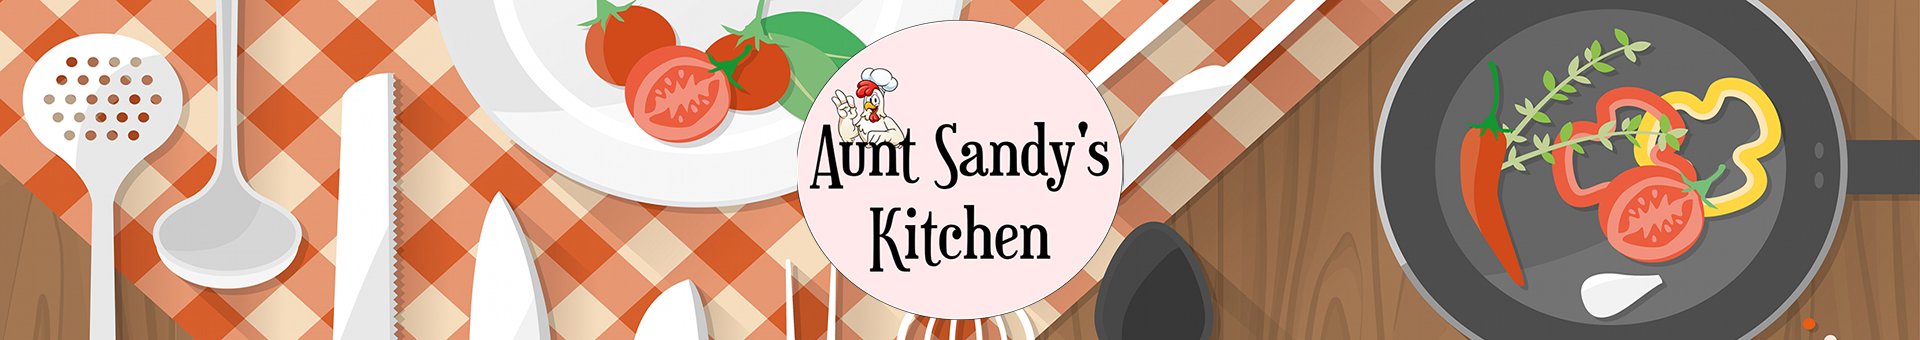 Aunt Sandy's Kitchen Simply Delicious Homemade Food